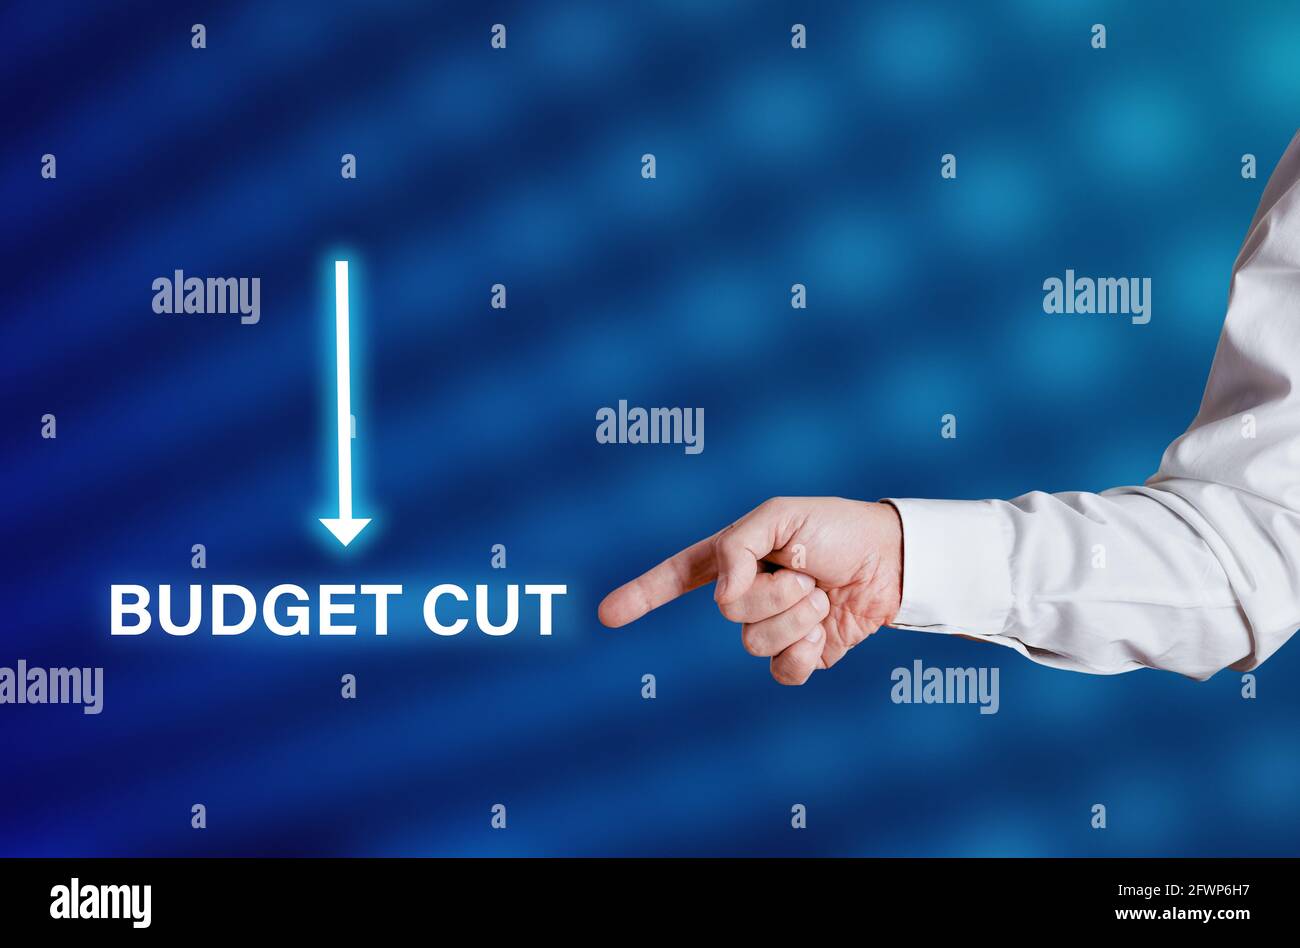 Businessman hand points to the word budget cut with arrow icon. Economic crisis and budget cuts in business concept. Stock Photo